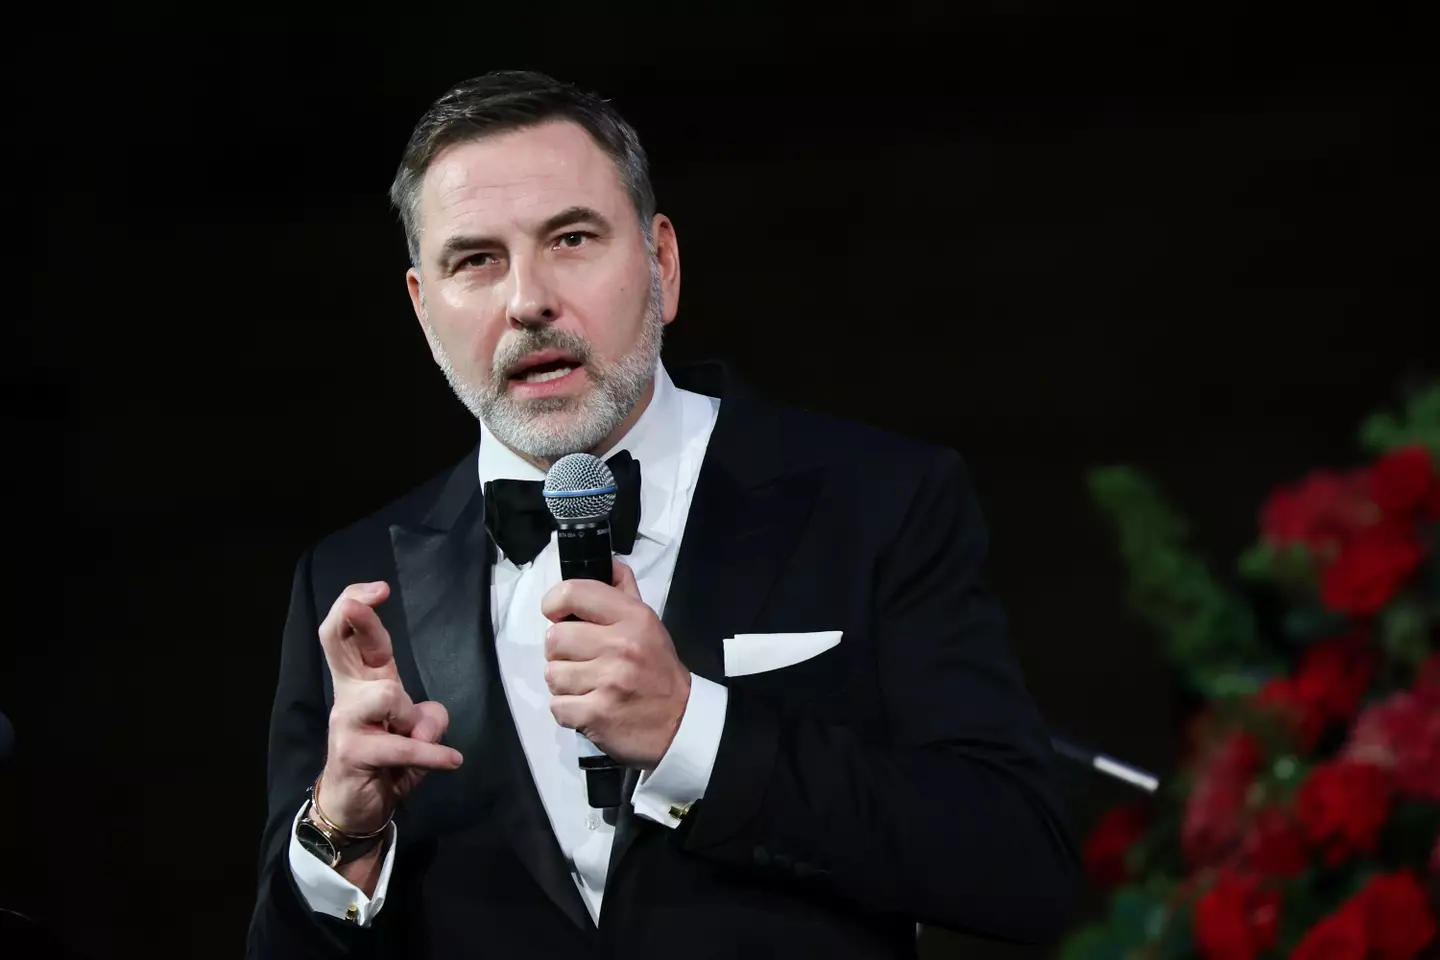 Walliams apologised after the transcript was first leaked.